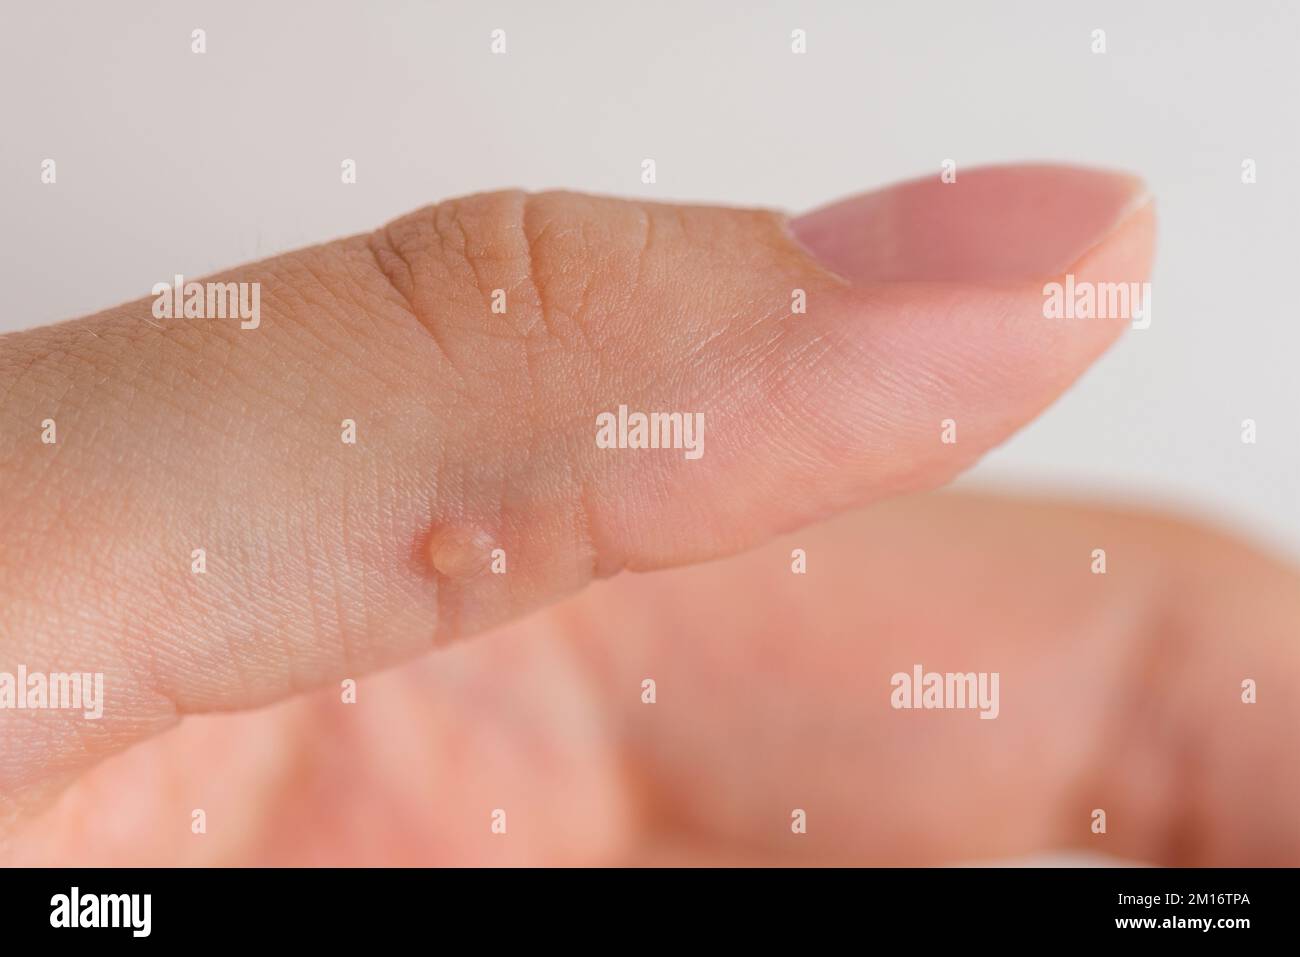 Wart on hand. The concept of treating warts and other skin defects. Close-up of a wart on a finger, a benign growth on human skin. Stock Photo